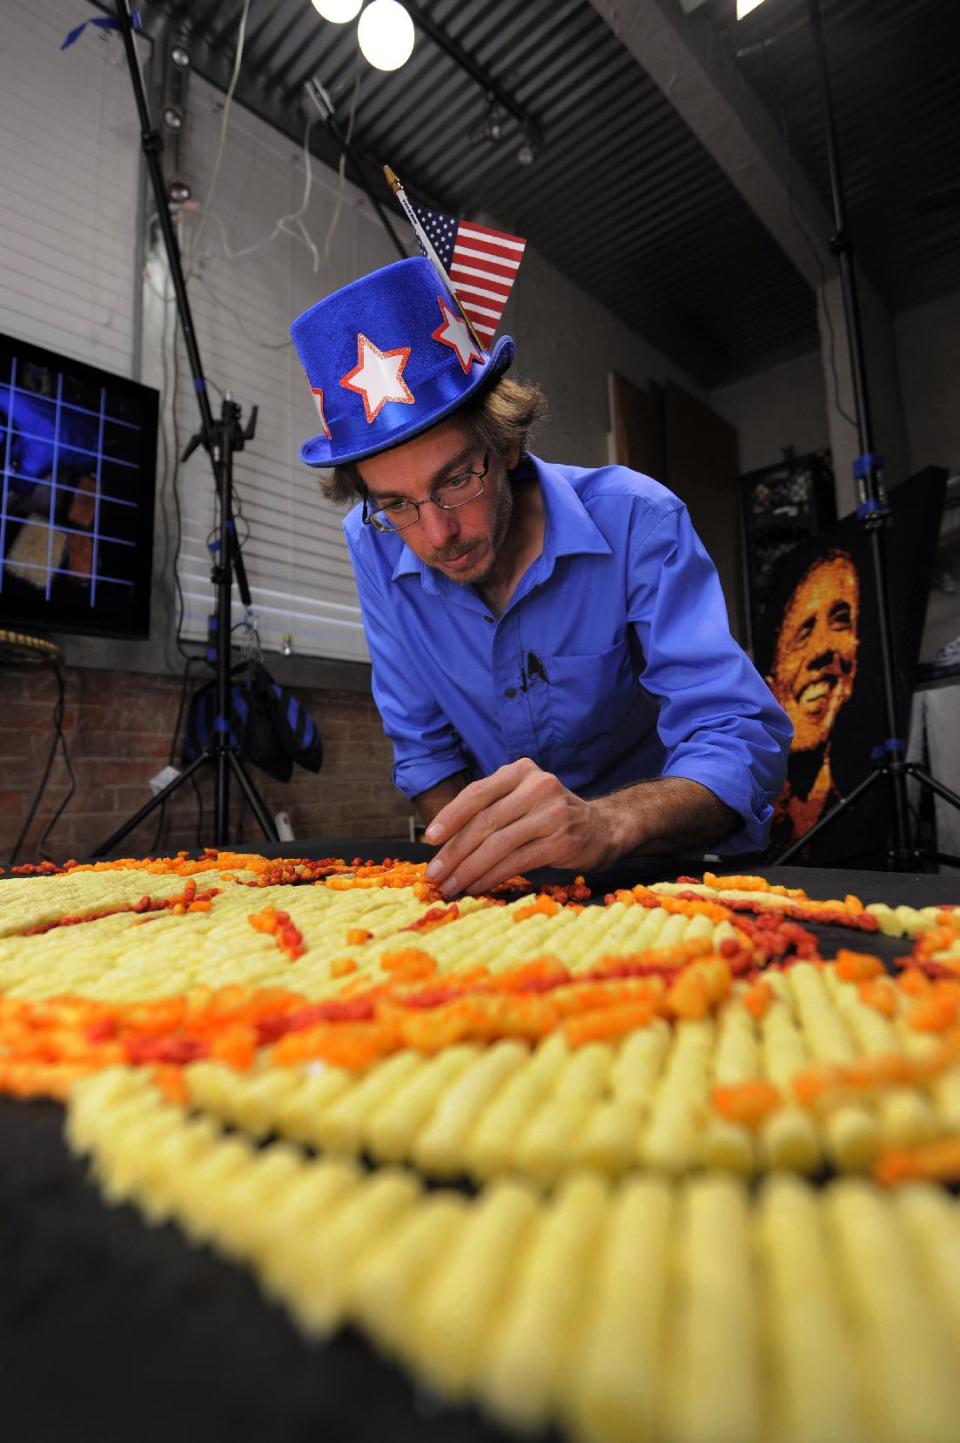 IMAGE DISTRIBUTED FOR CHEETOS - Artist Jason Baalman puts the finishing touches on a Cheetos portrait of former Gov. Mitt Romney Tuesday, Oct. 2, 2012, in Baalman’s Colorado Springs, Colo., studio. Today, the Cheetos brand unveiled a new electoral polling model with the unveiling of 3 feet by 4 feet one-of-a-kind Cheetos portraits of the Democratic and Republican presidential nominees – President Barack Obama and former Gov. Mitt Romney. Debuting on Facebook today at 11 a.m. CT, fans are encouraged to vote for their candidate’s portrait – made entirely of more than 2,000 individual Cheetos cheese snacks – for a chance to win the actual portrait. (Photo by Jack Dempsey/Invision for Cheetos/AP Images)